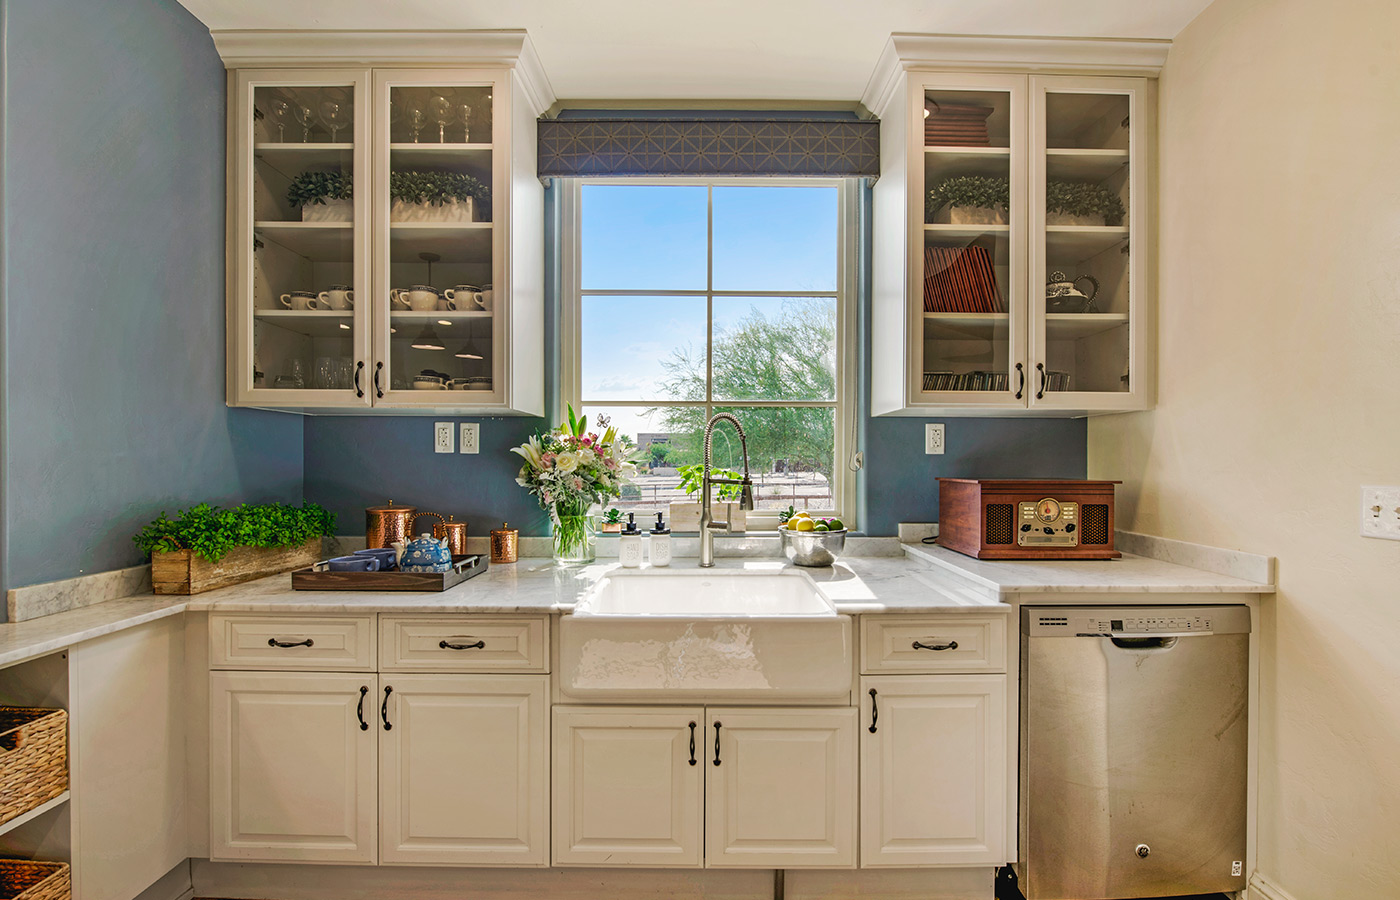 Kitchen cabinets with window and sky view.